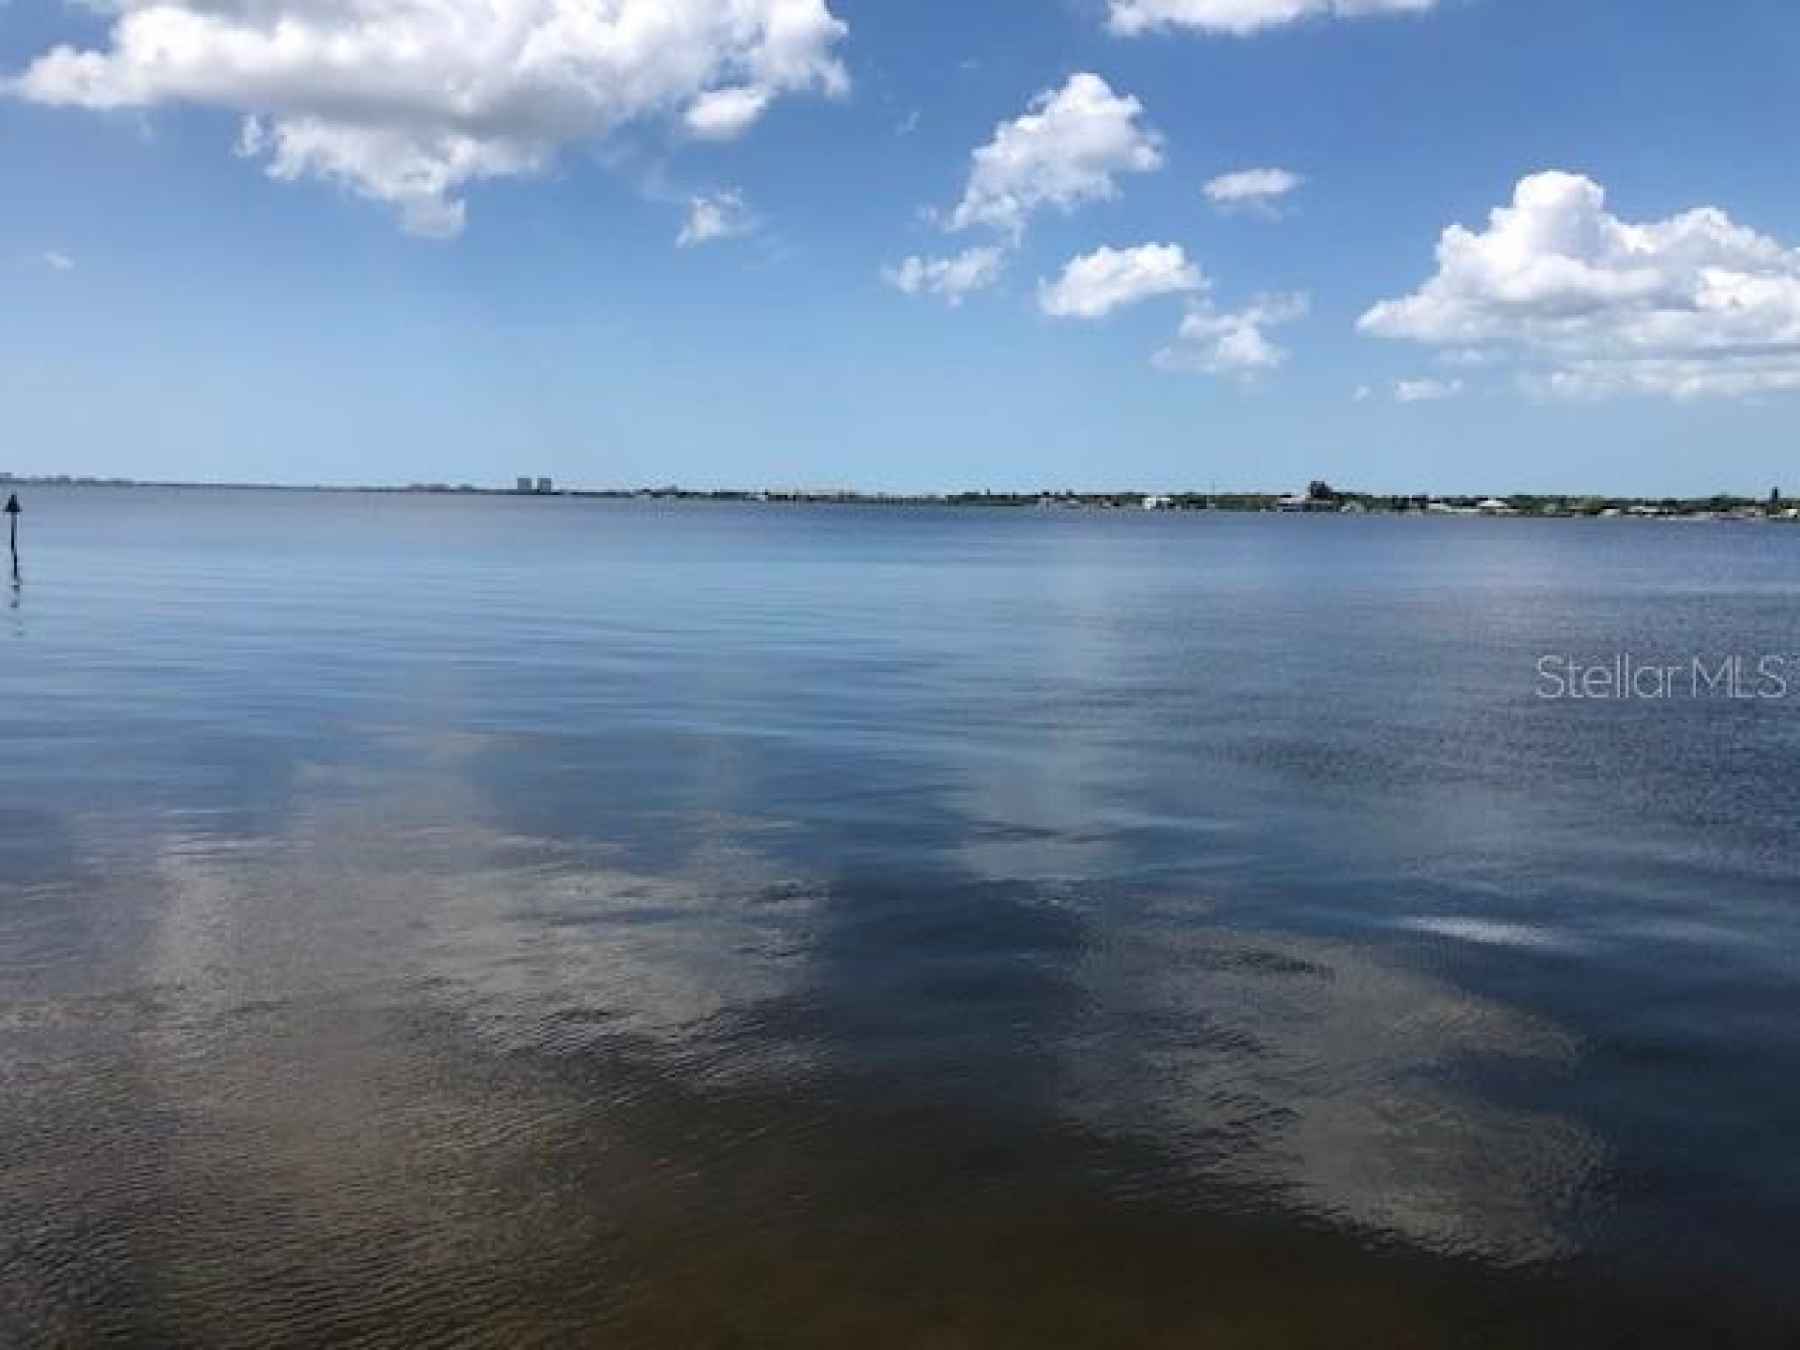 View of the Manatee River behind your home...it's almost a mile wide here.